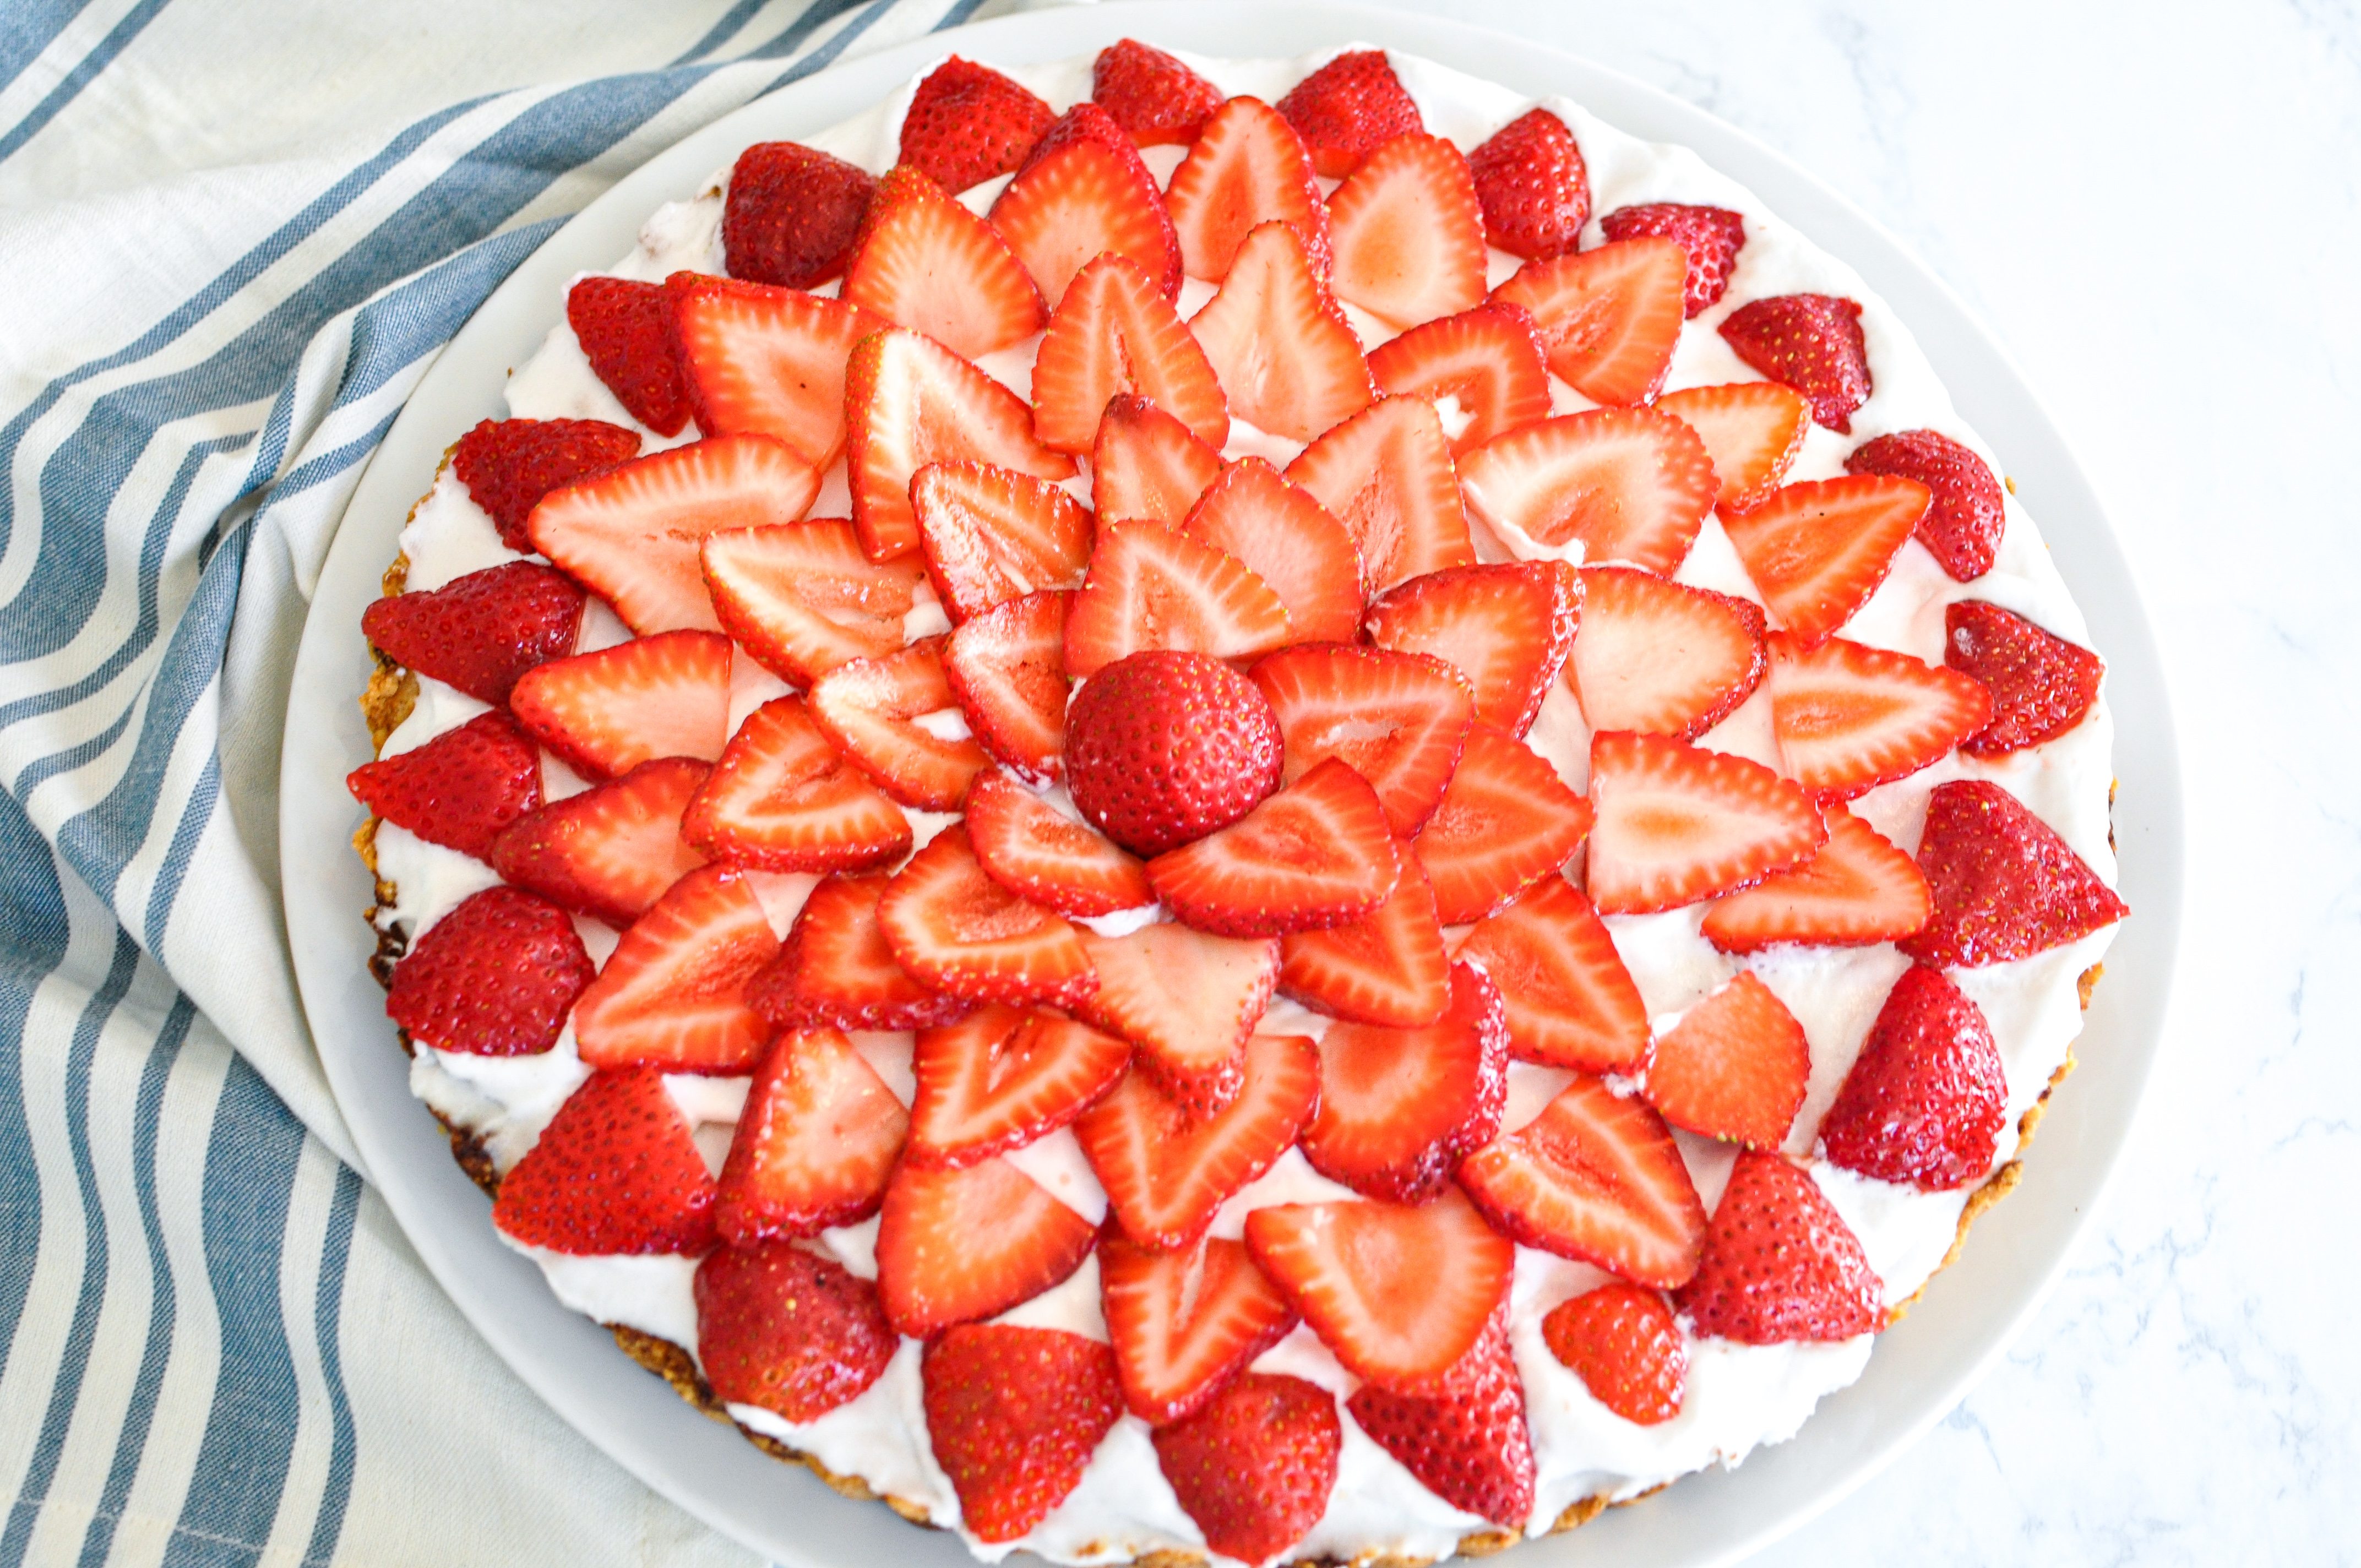 Paleo Strawberry Cream Tart (Become a Member for Access)